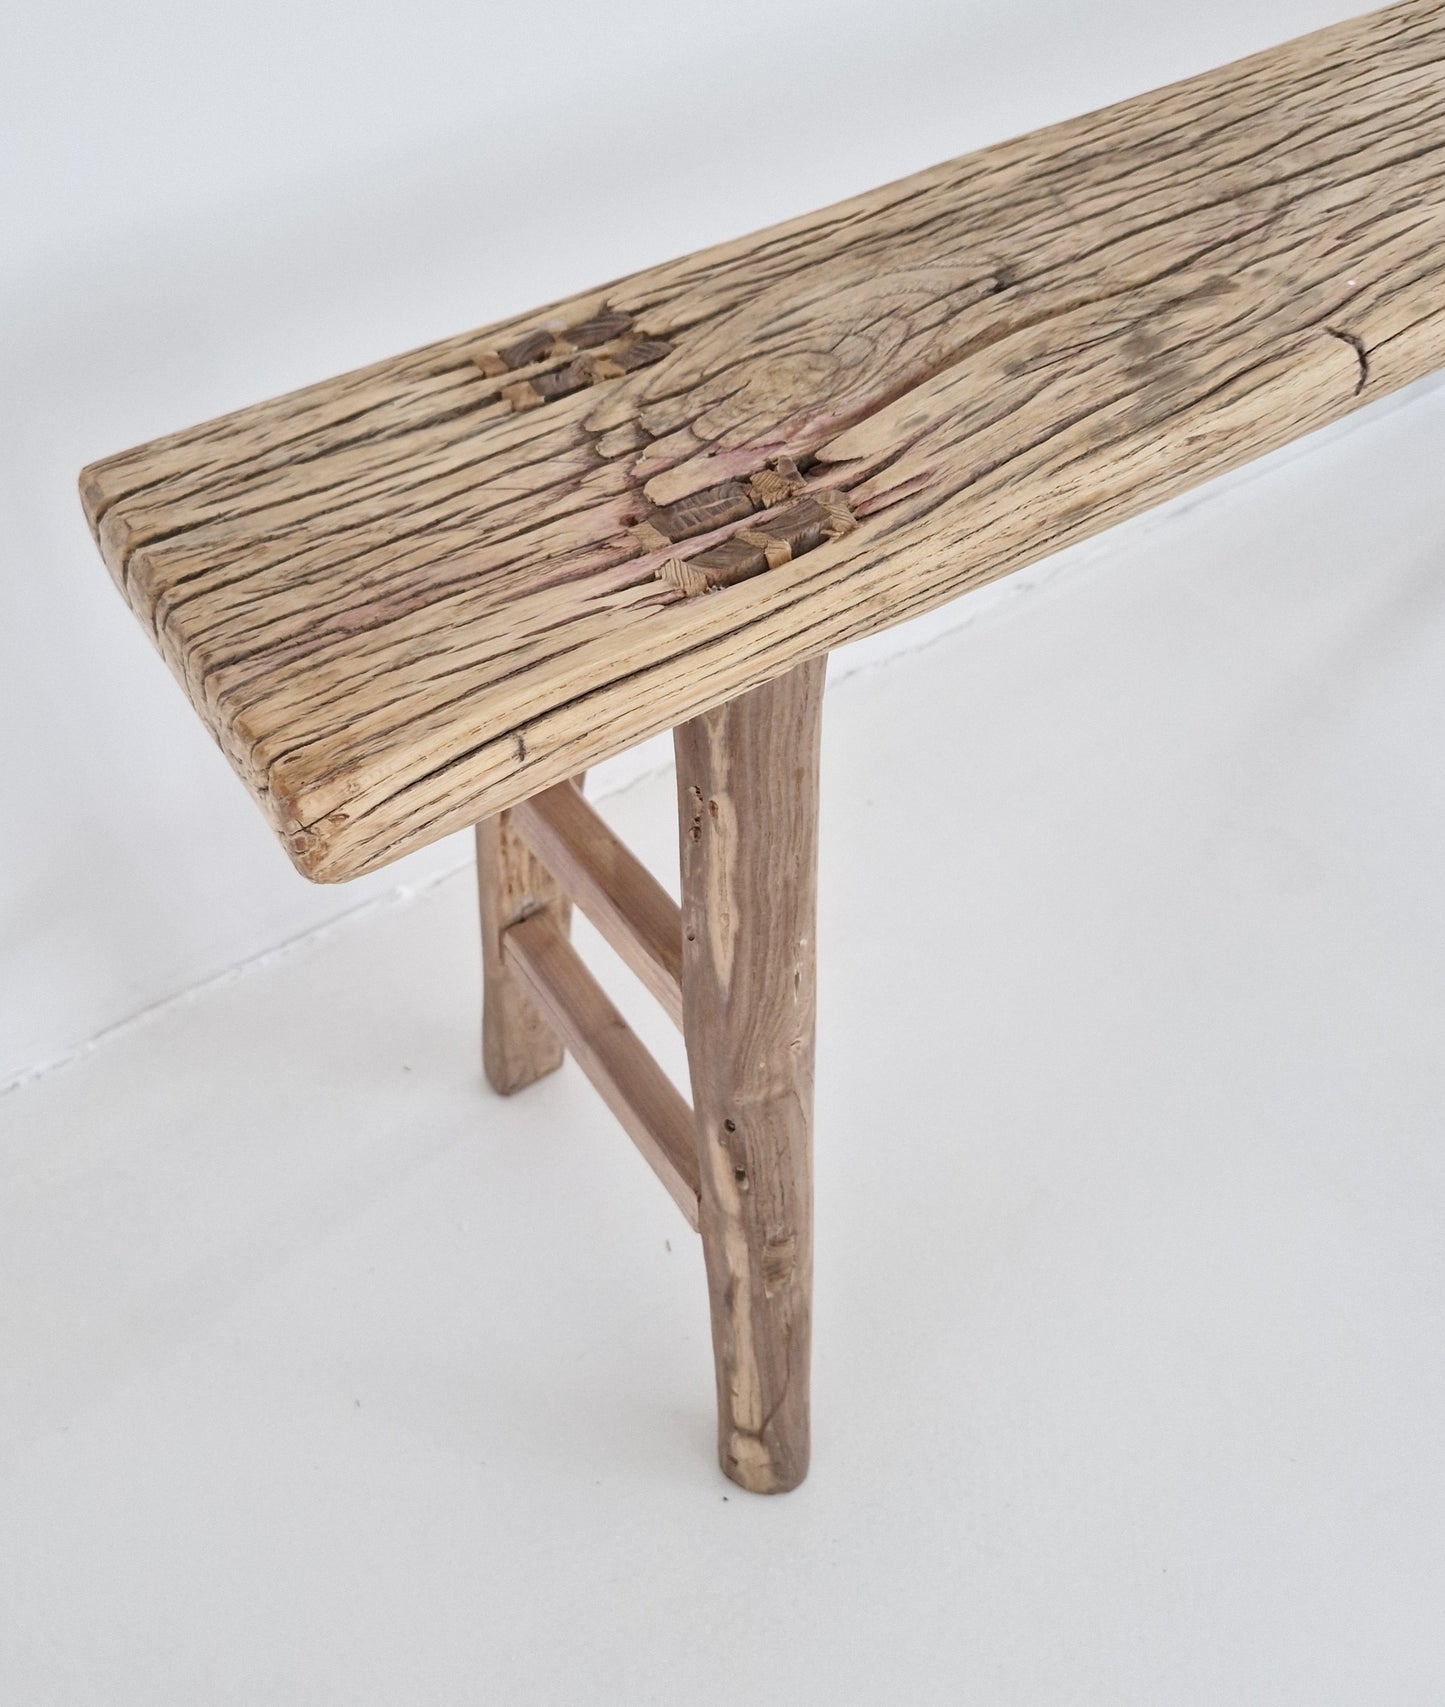 Old wooden bench #8 (115cm)